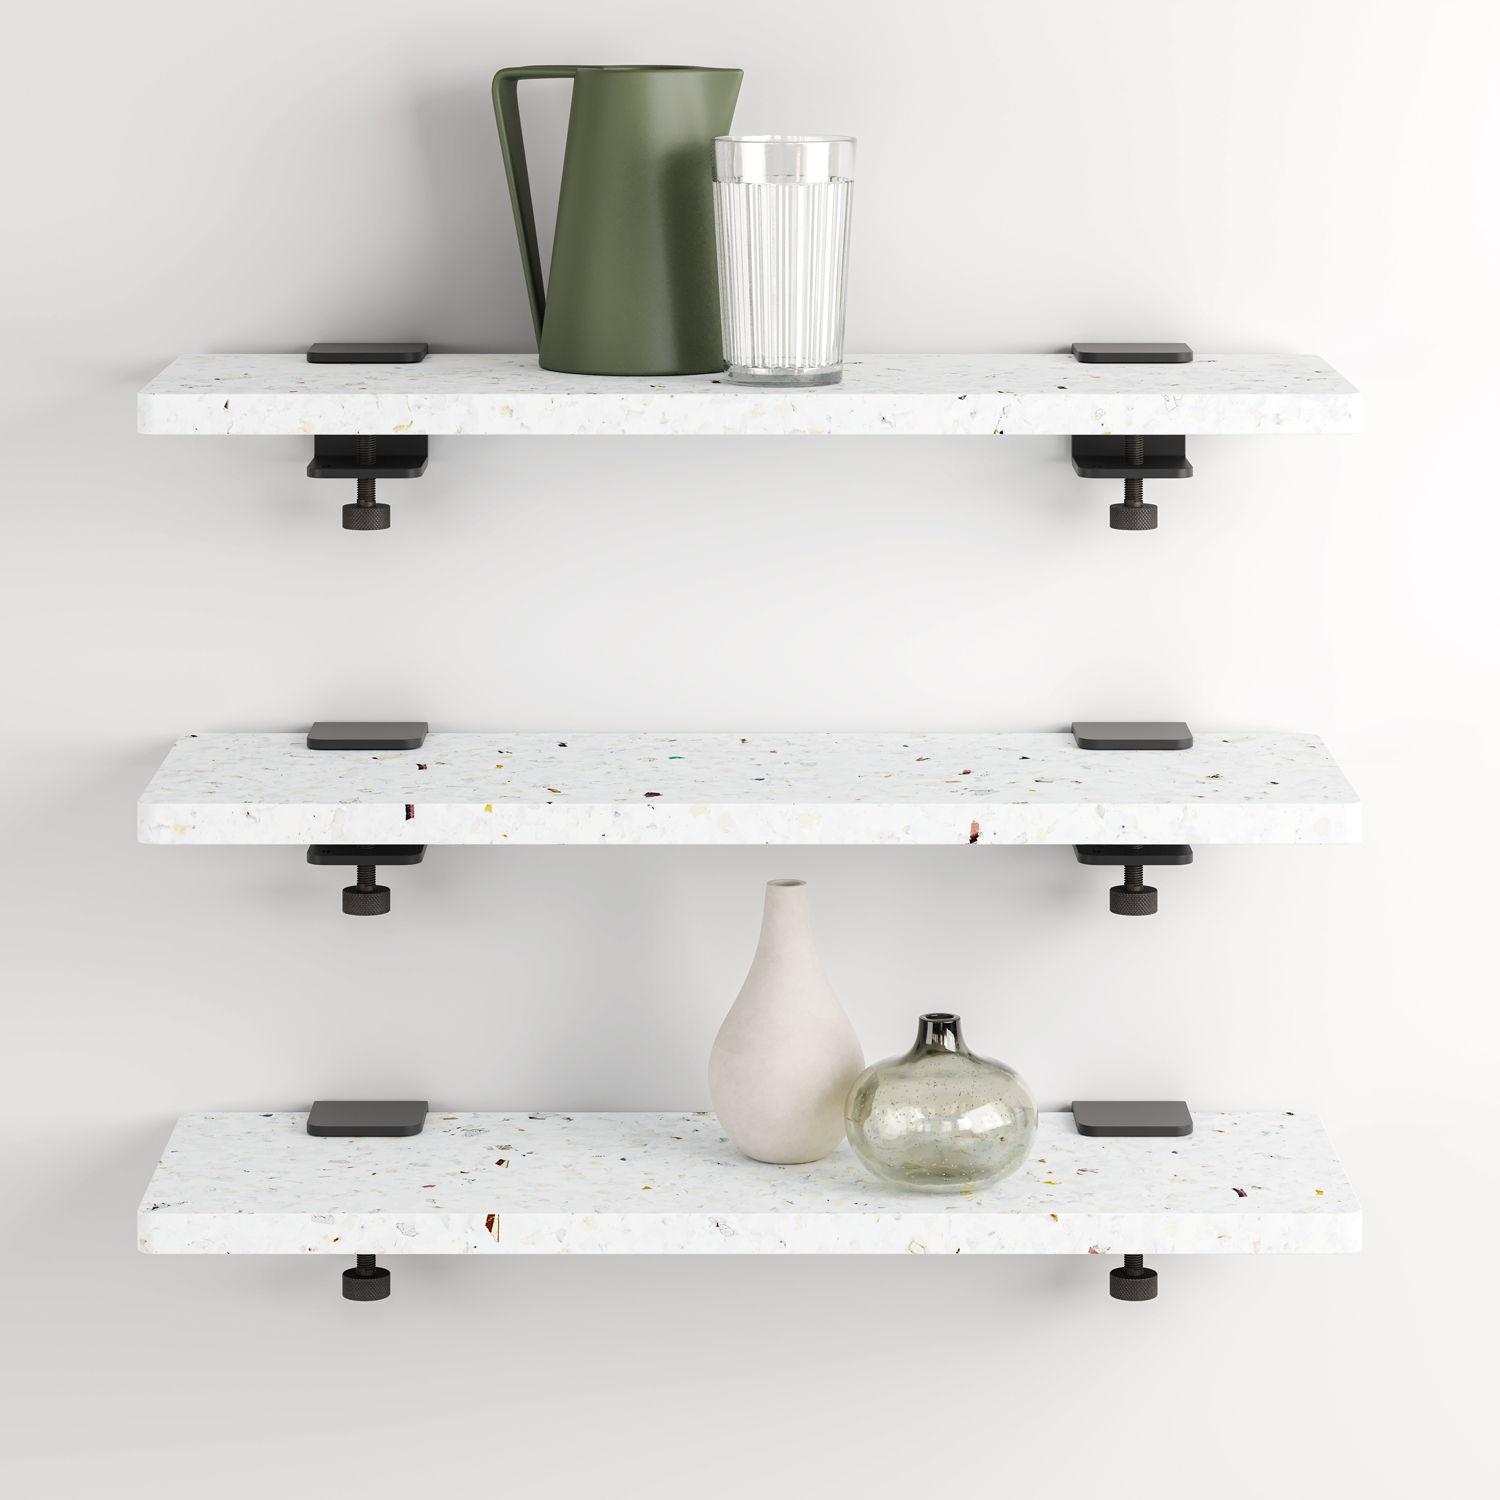 Set of 3 white VENEZIA wall shelves in recycled plastic - 60 to 150cm